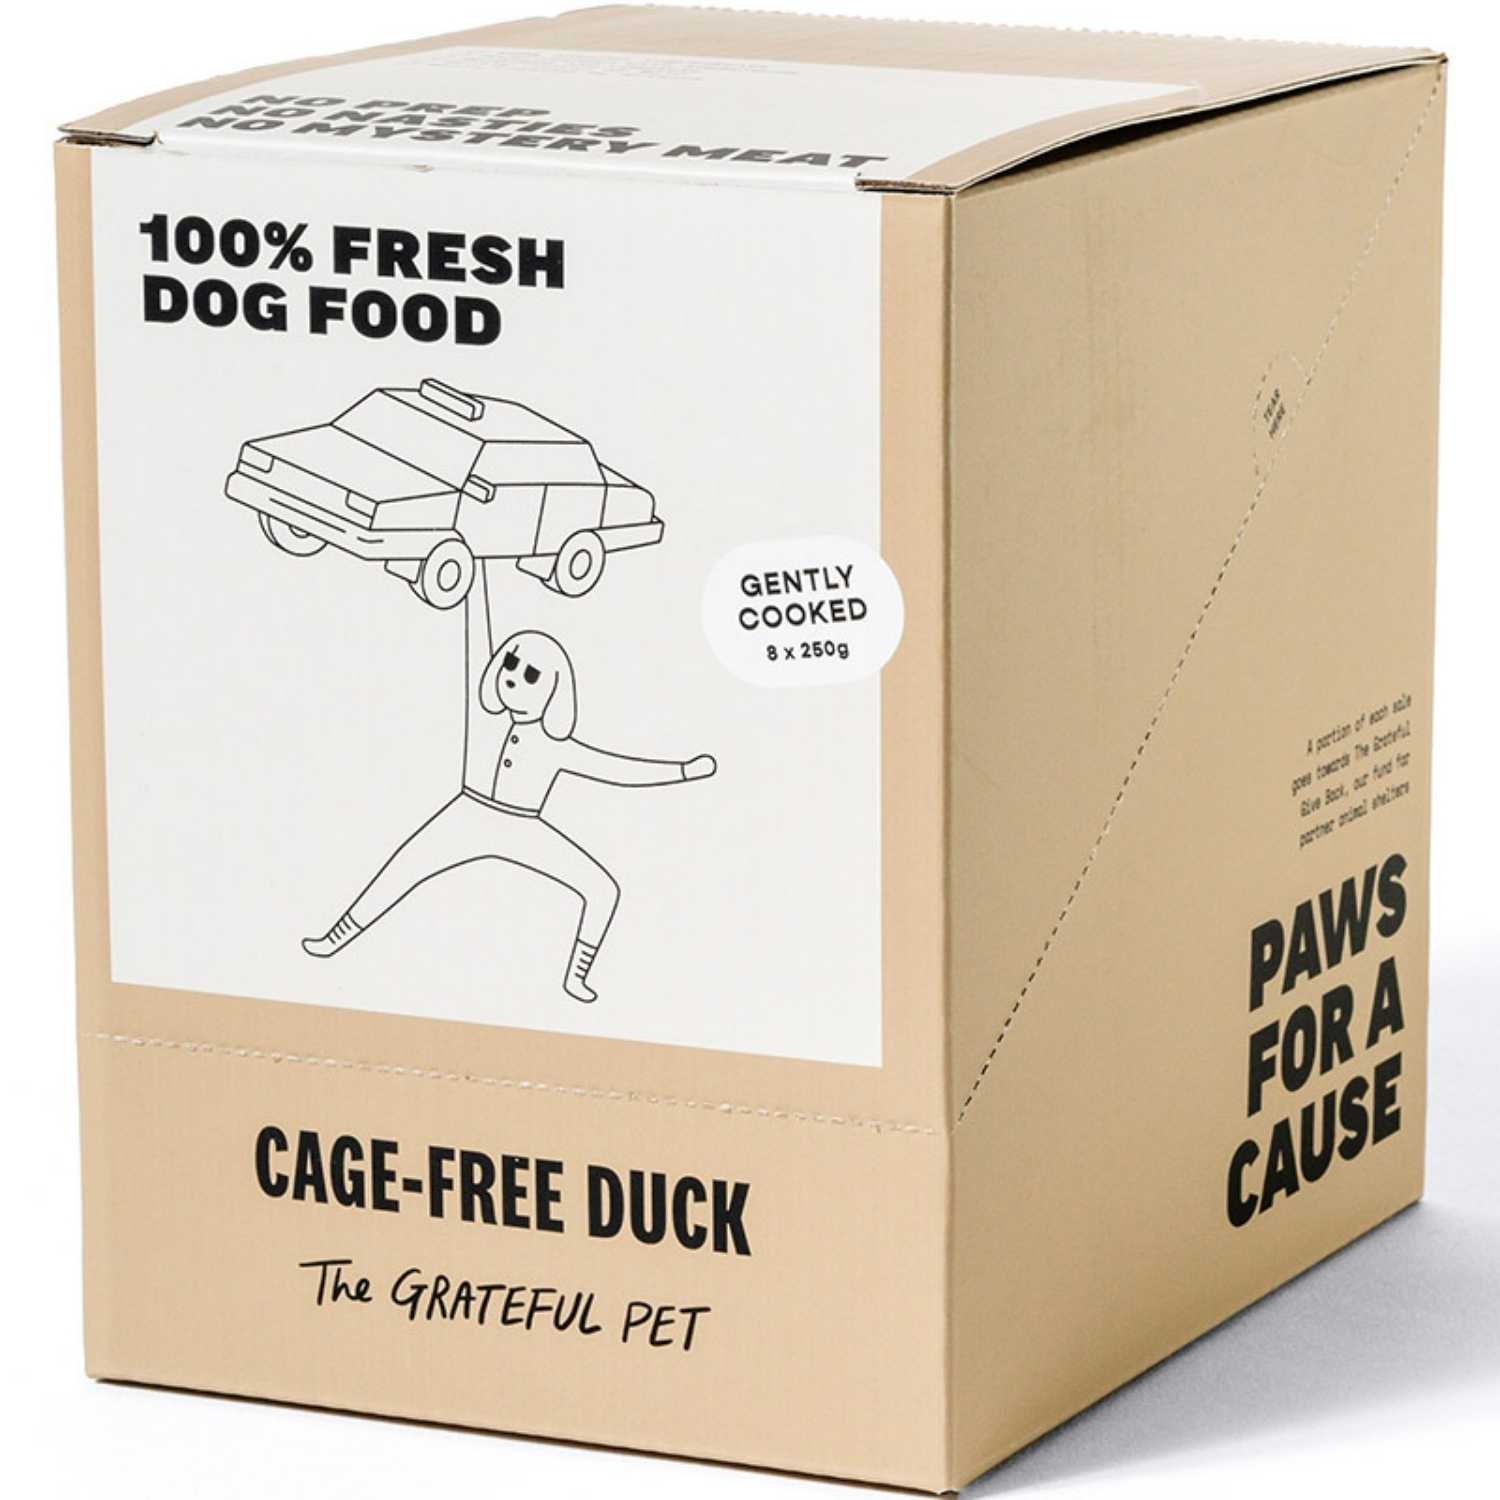 The Grateful Pet - Gently Cooked (Cage-Free Duck) - Dog (8 x 250g Pouch) Food (Case)